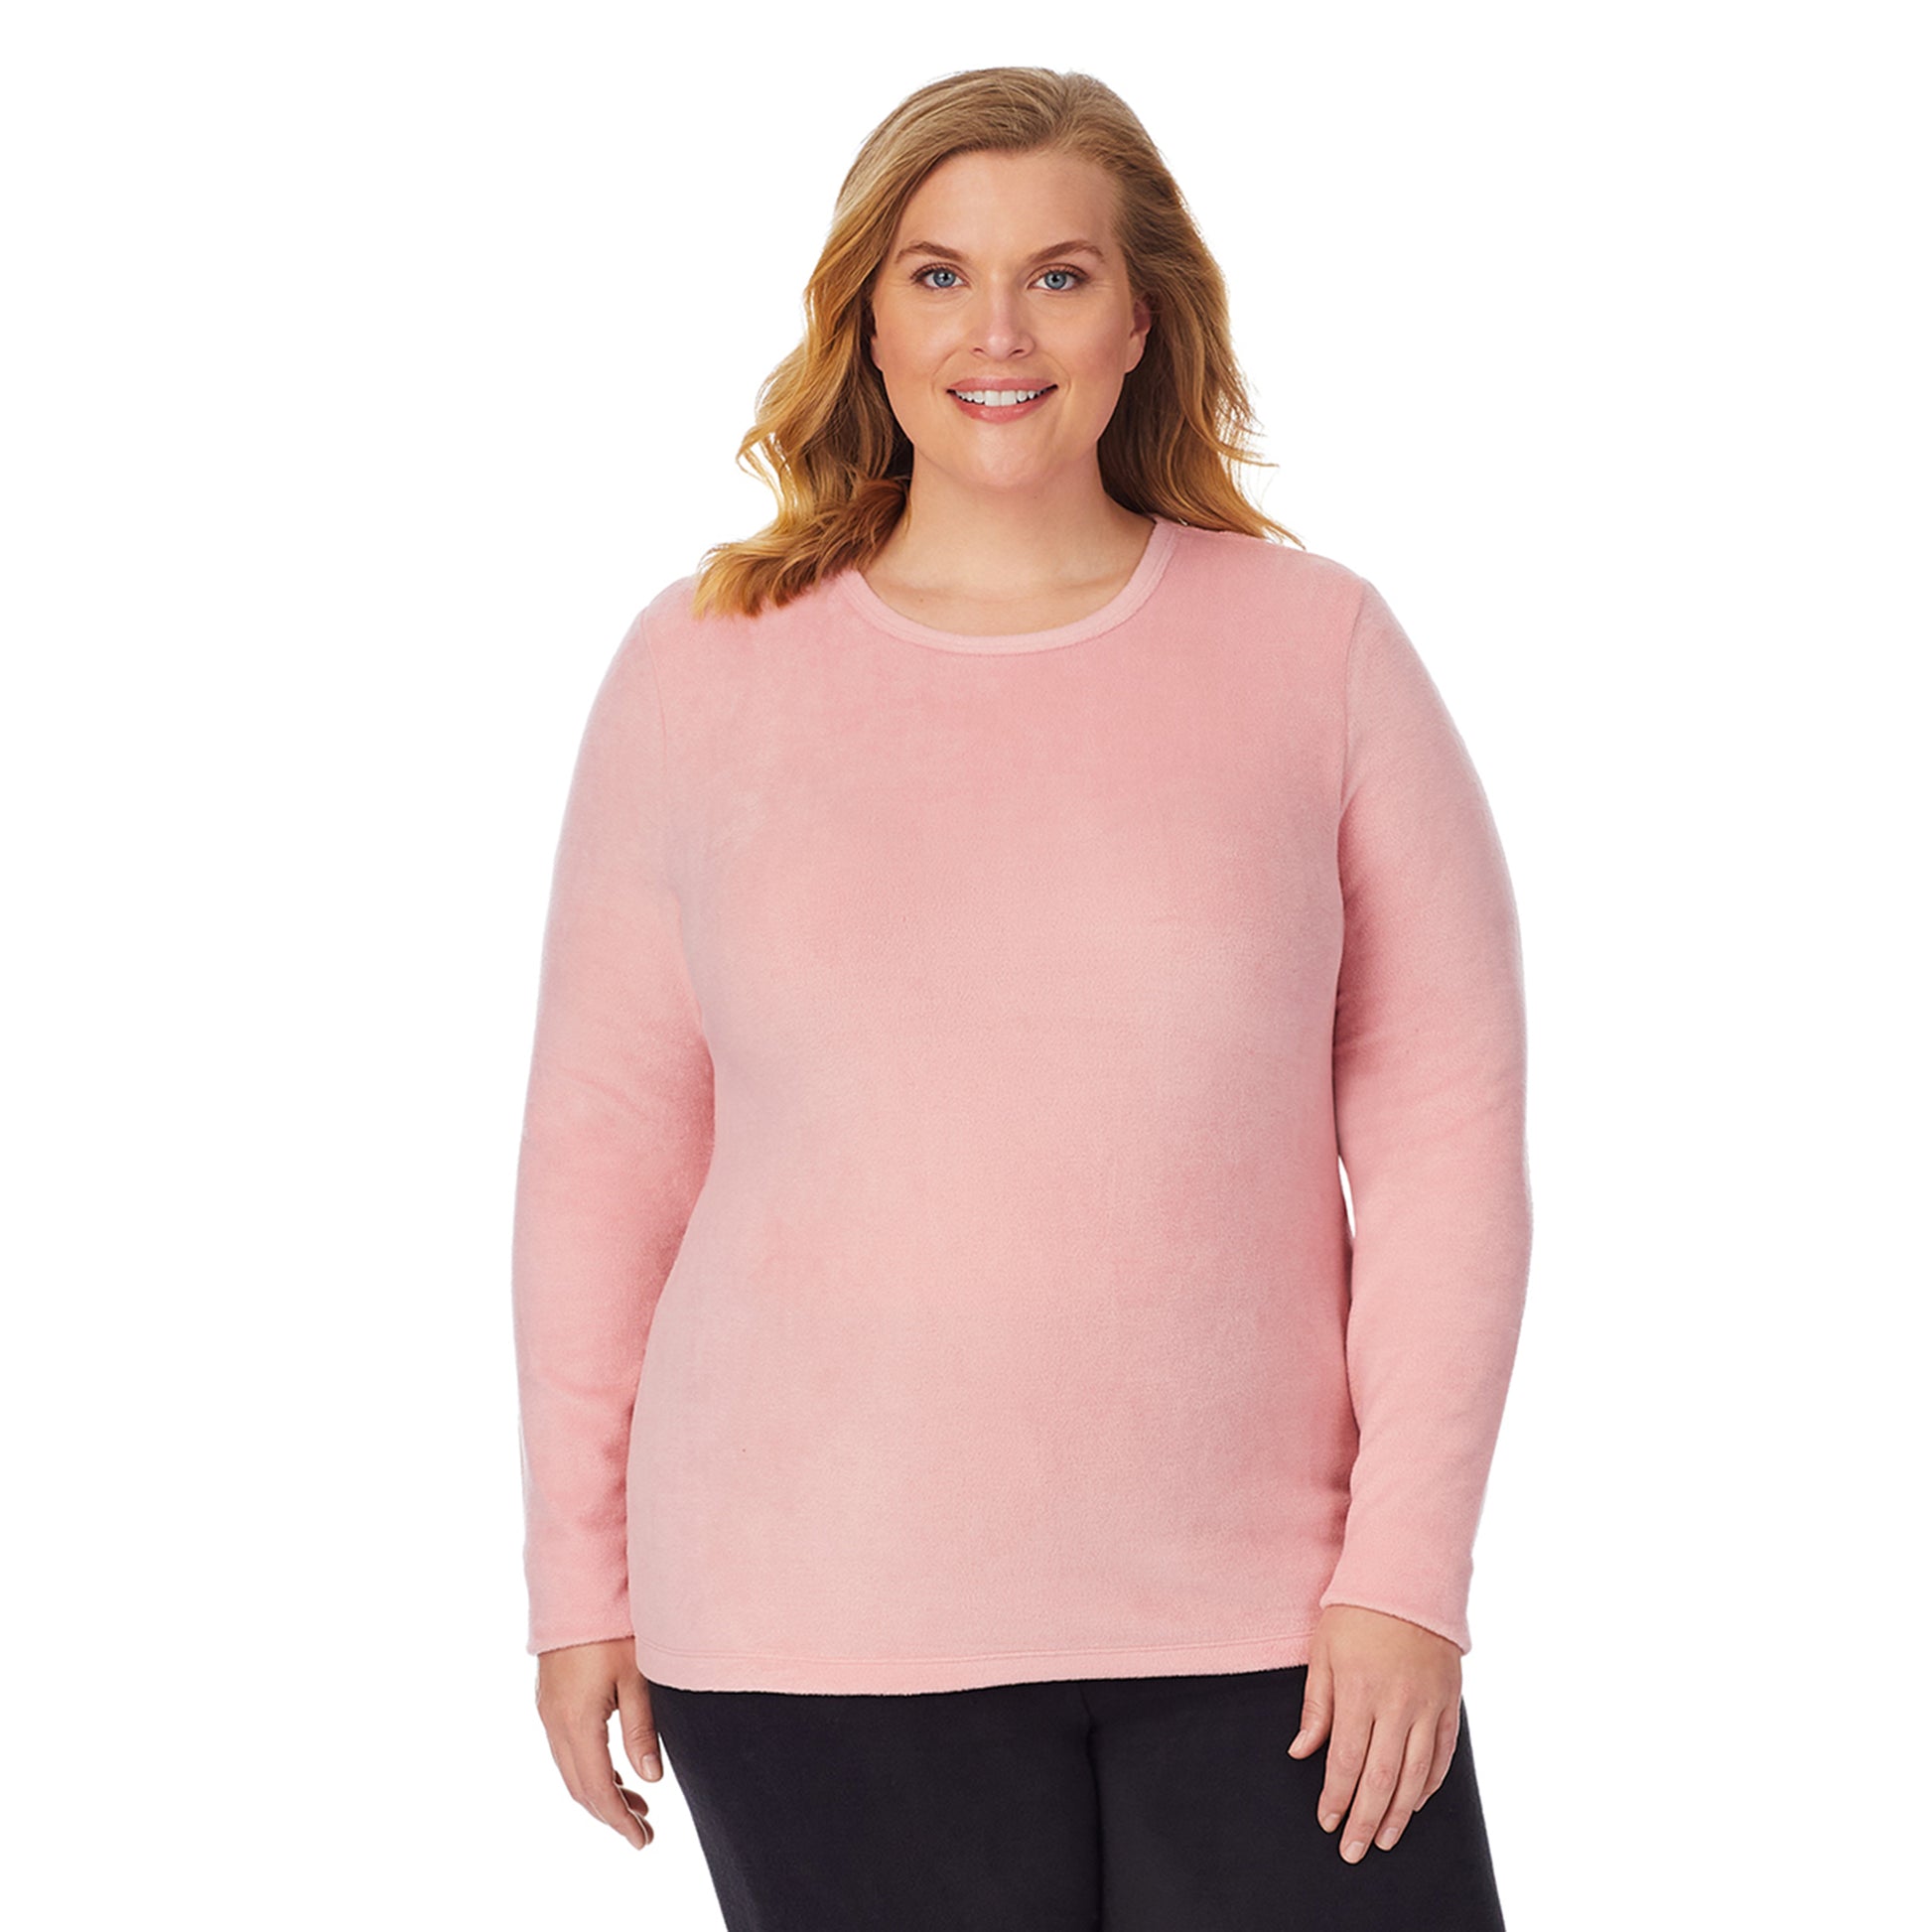 Powder Pink; Model is wearing size 1X. She is 5'7", Bust 42.5", Waist 34.5", Hips 46".@Upper body of a lady wearing pink long sleeve crew